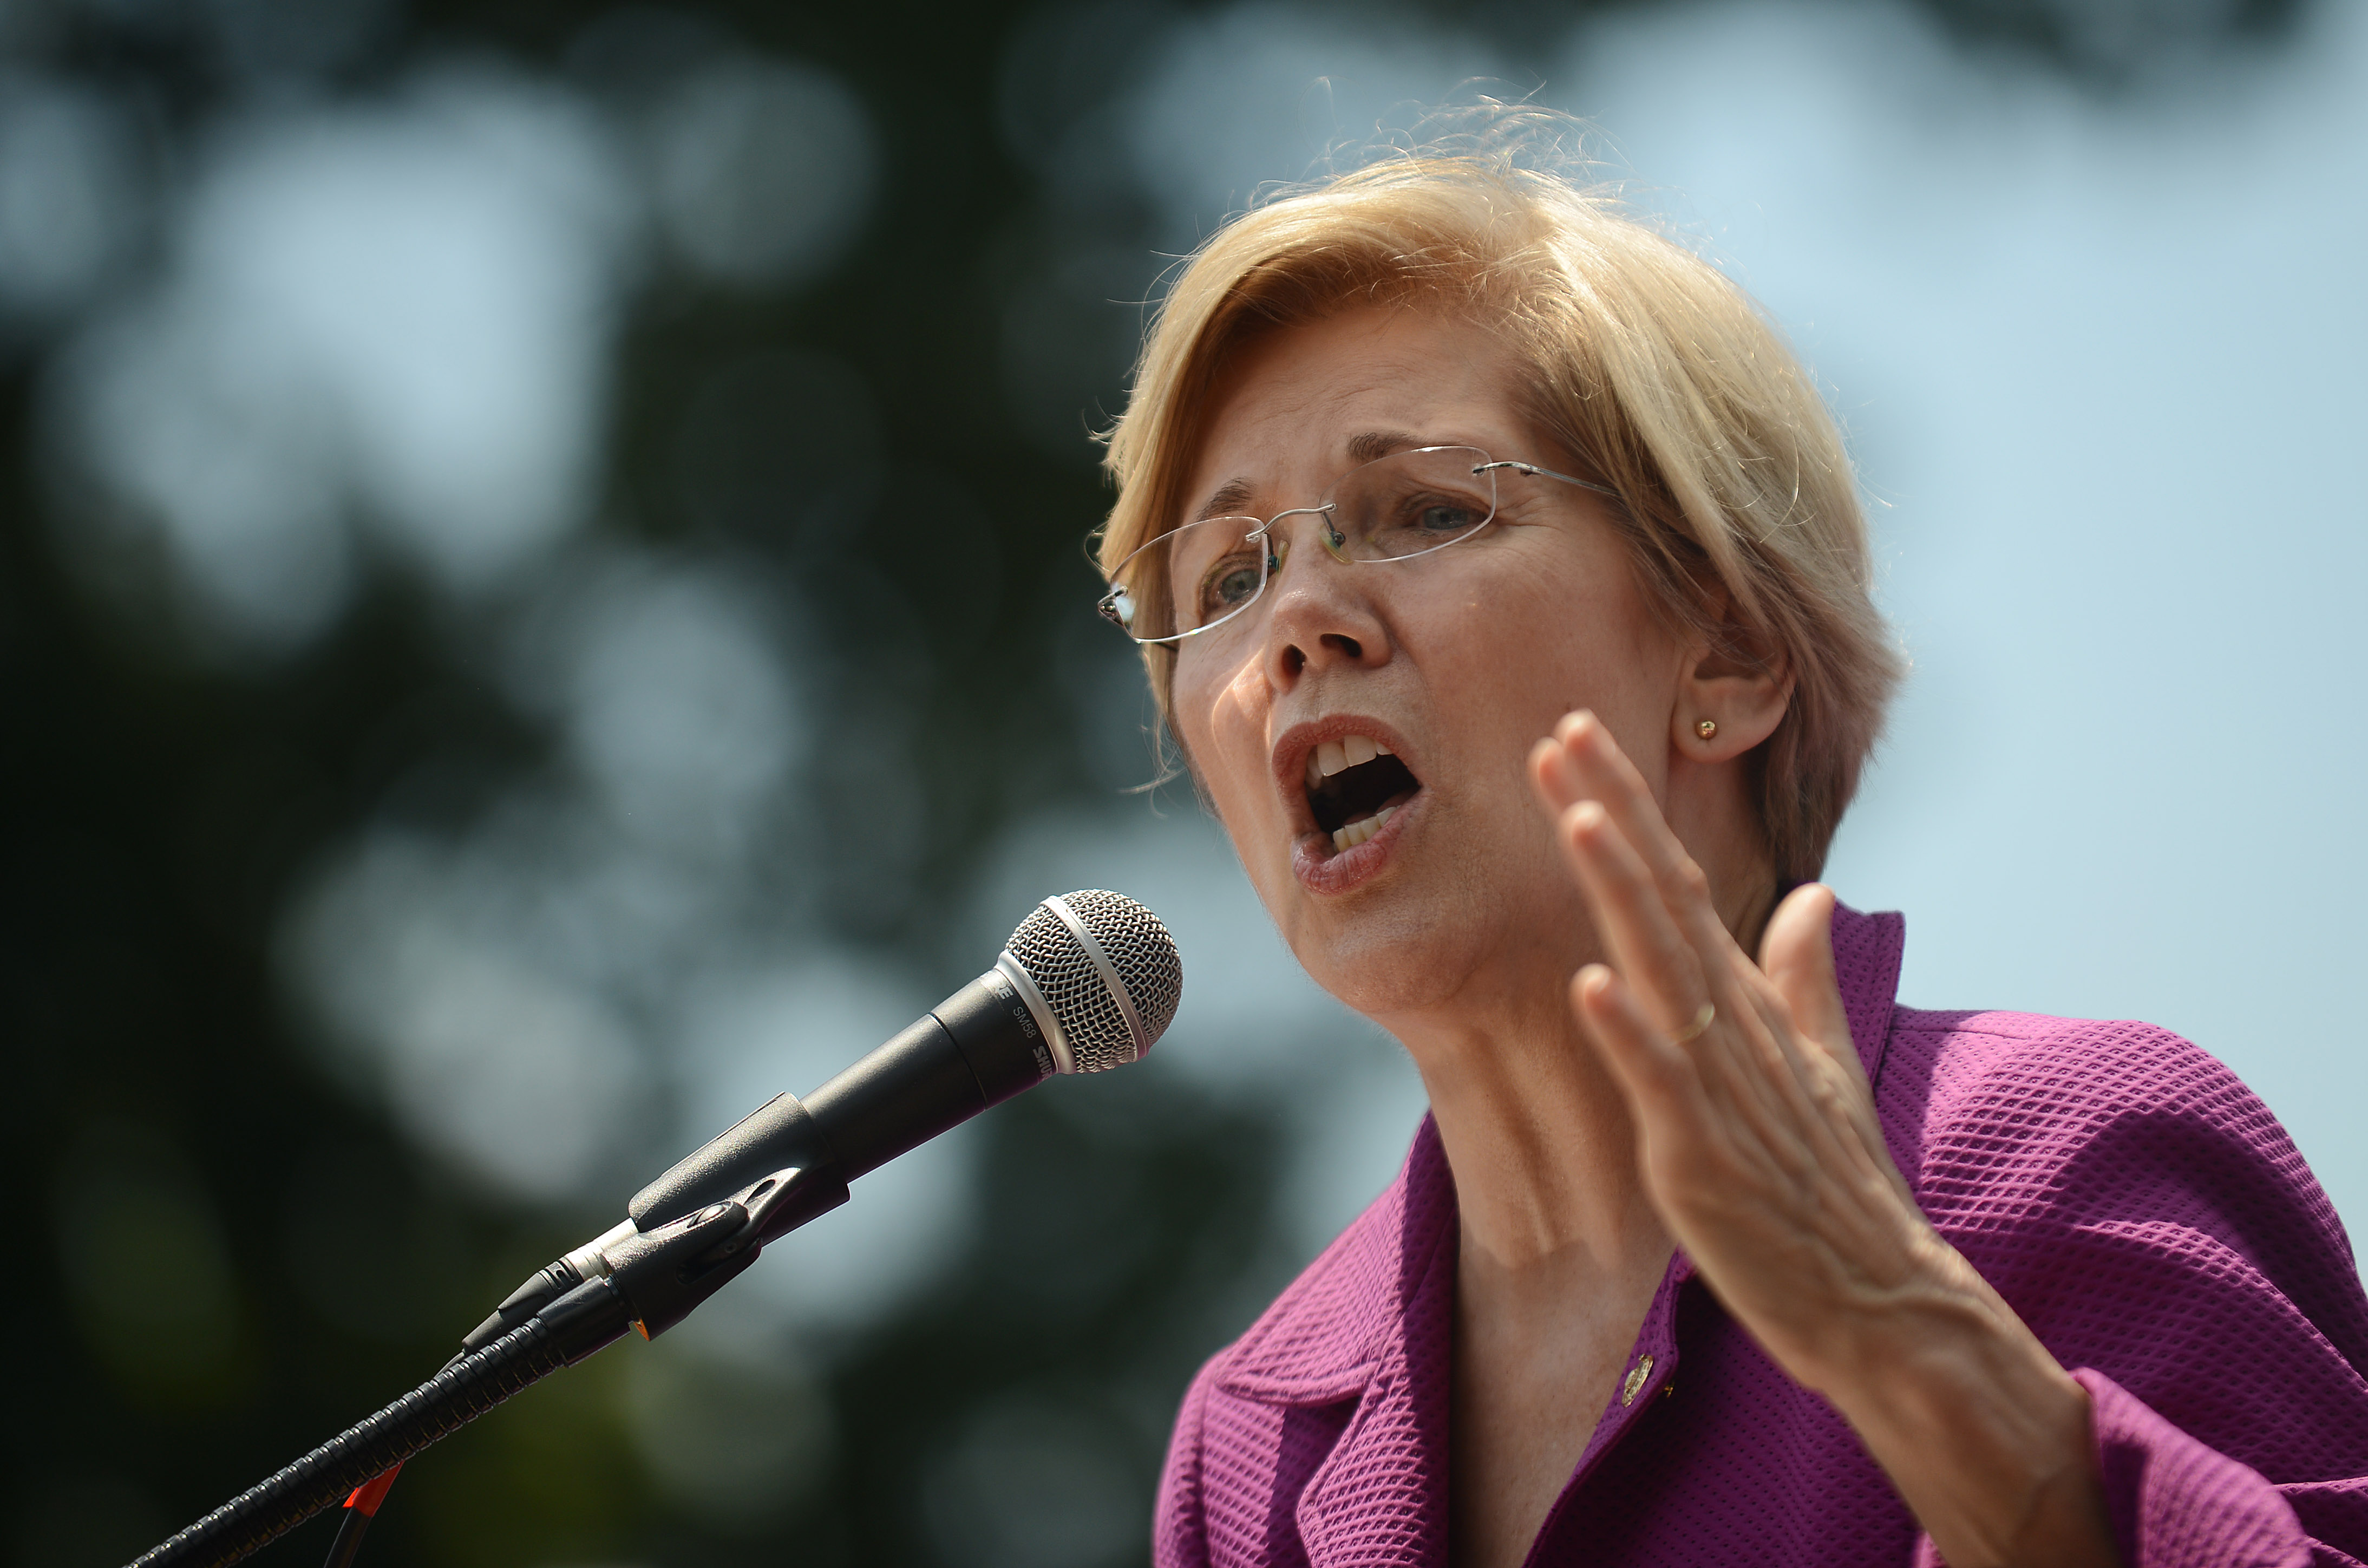 Massachusetts Sen. Elizabeth Warren speaks at a rally to oppose the repeal of the Affordable Care Act and its replacement on Capitol Hill on June 21, 2017 in Washington, D.C. (Astrid Riecken/Getty Images)